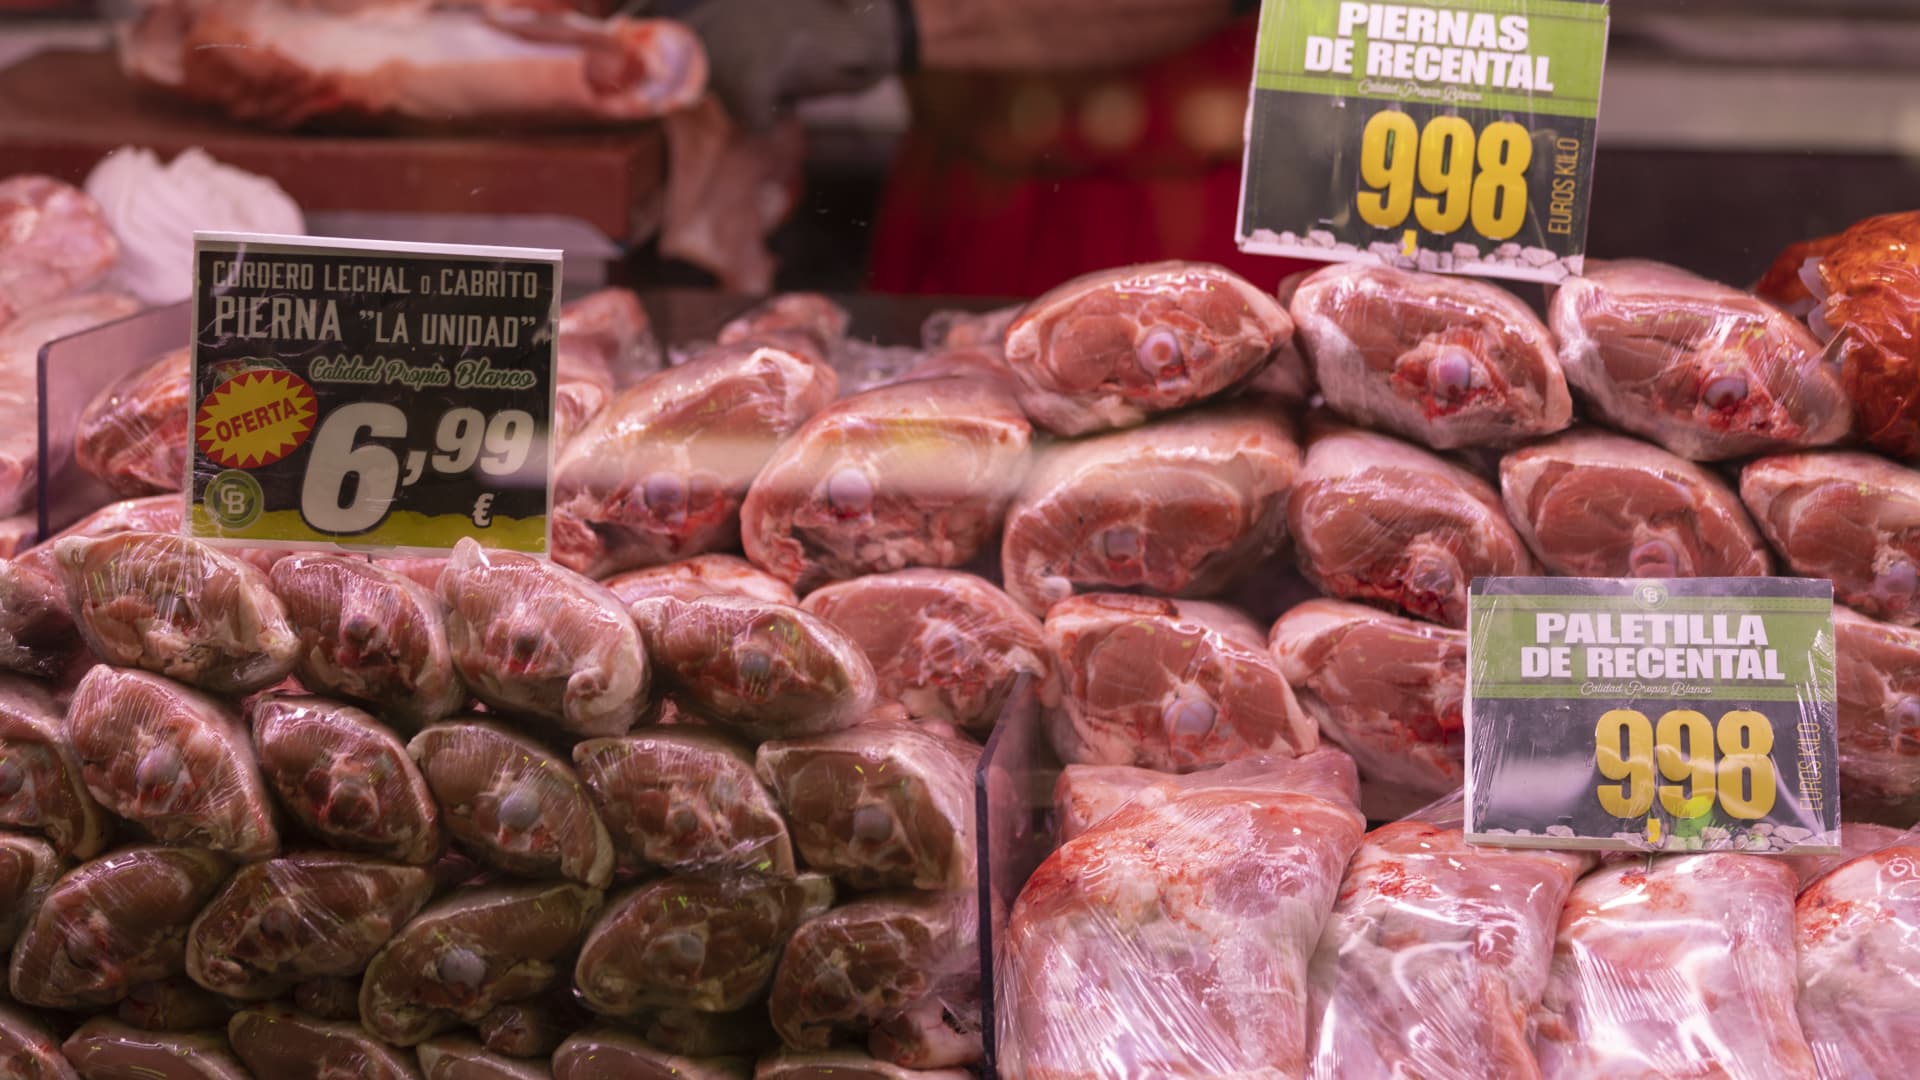 Lamb pieces displayed in a butcher's shop at a market stall on March 15, 2023, in Madrid, Spain.